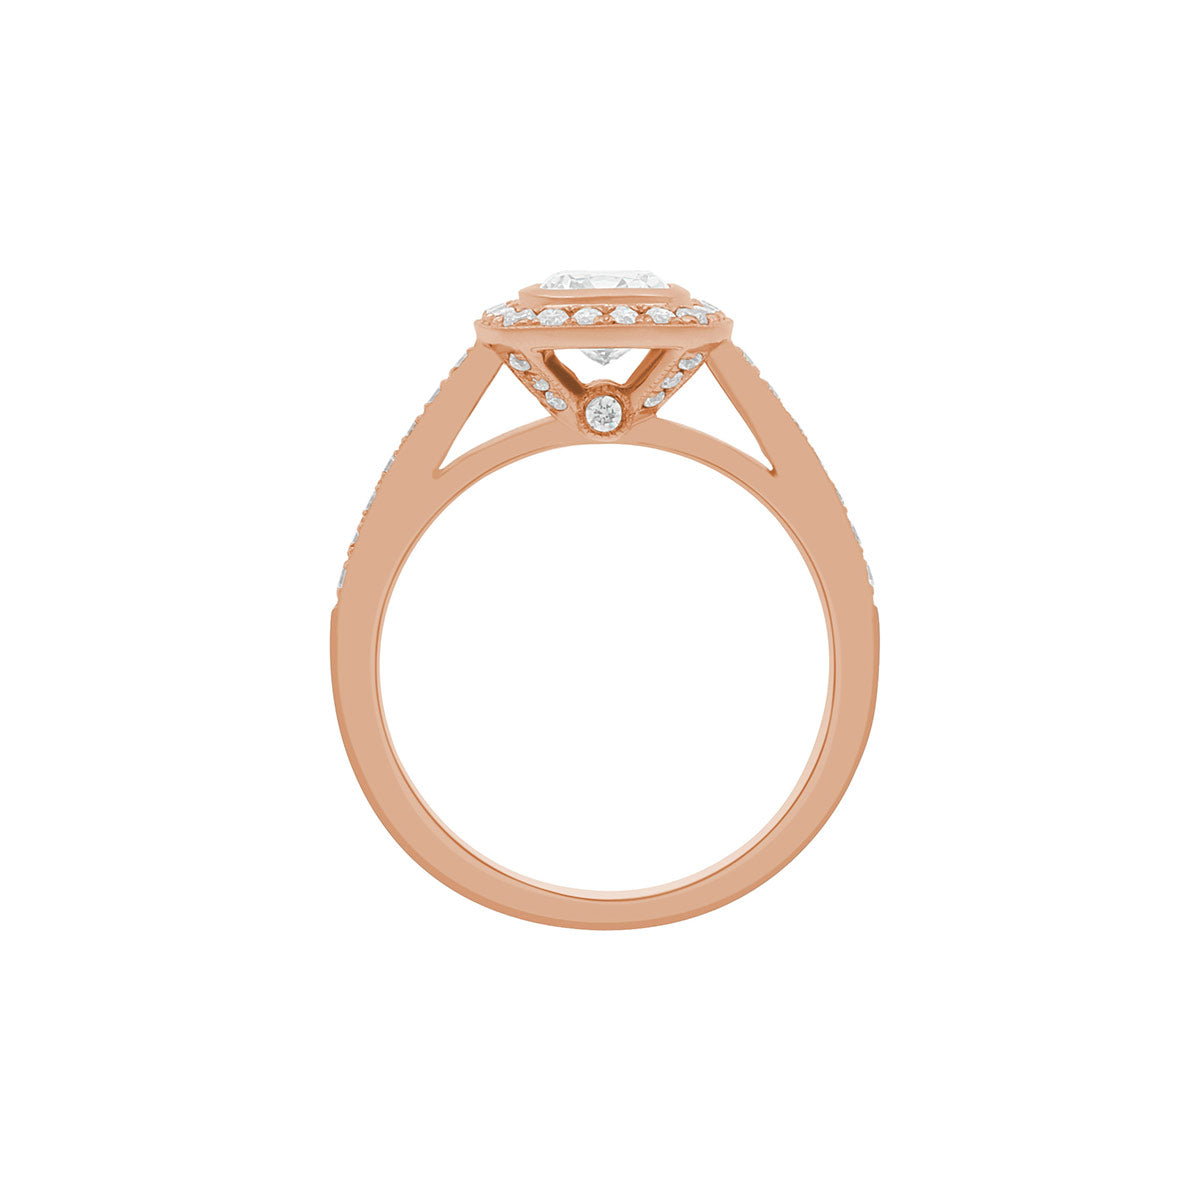 Bezel Set Cushion Cut Engagement Ring in rose gold standing upright